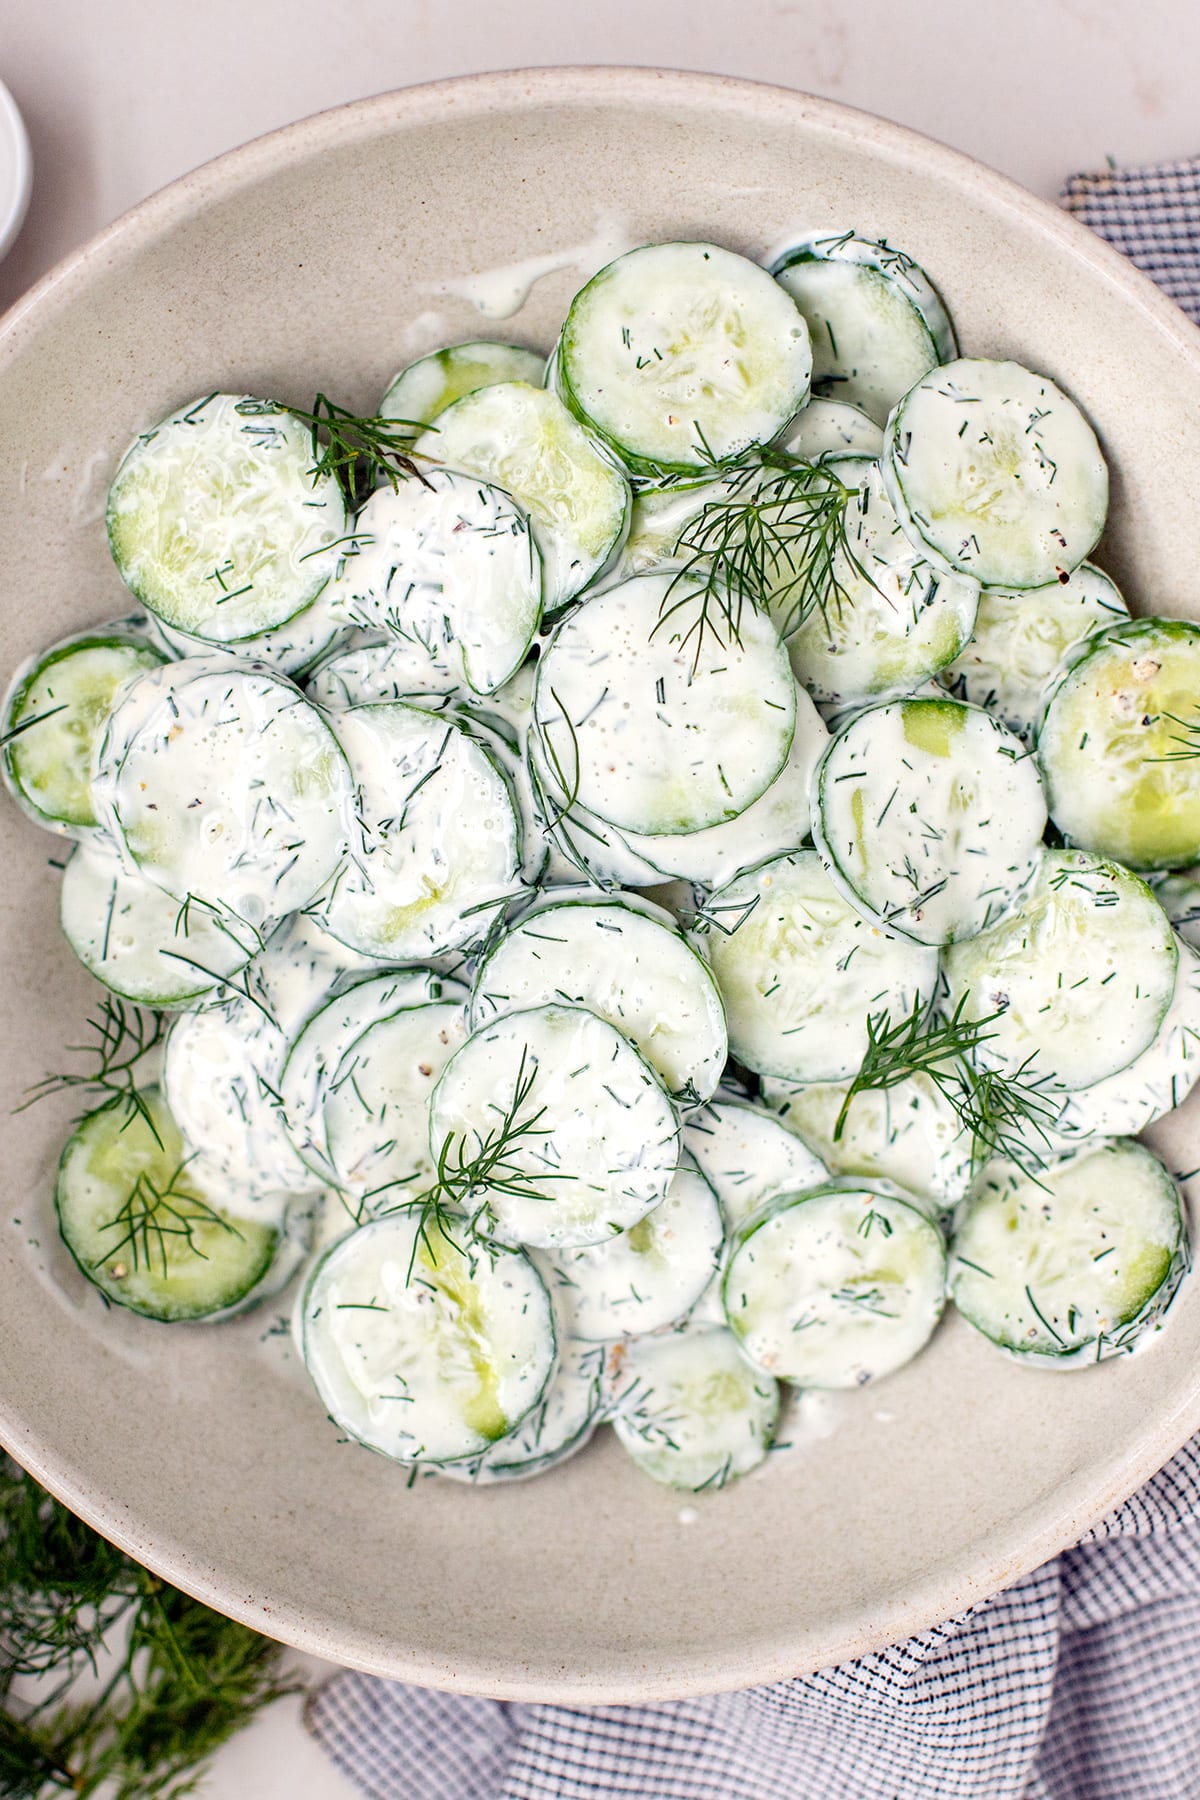 Cucumber dill salad with sour cream